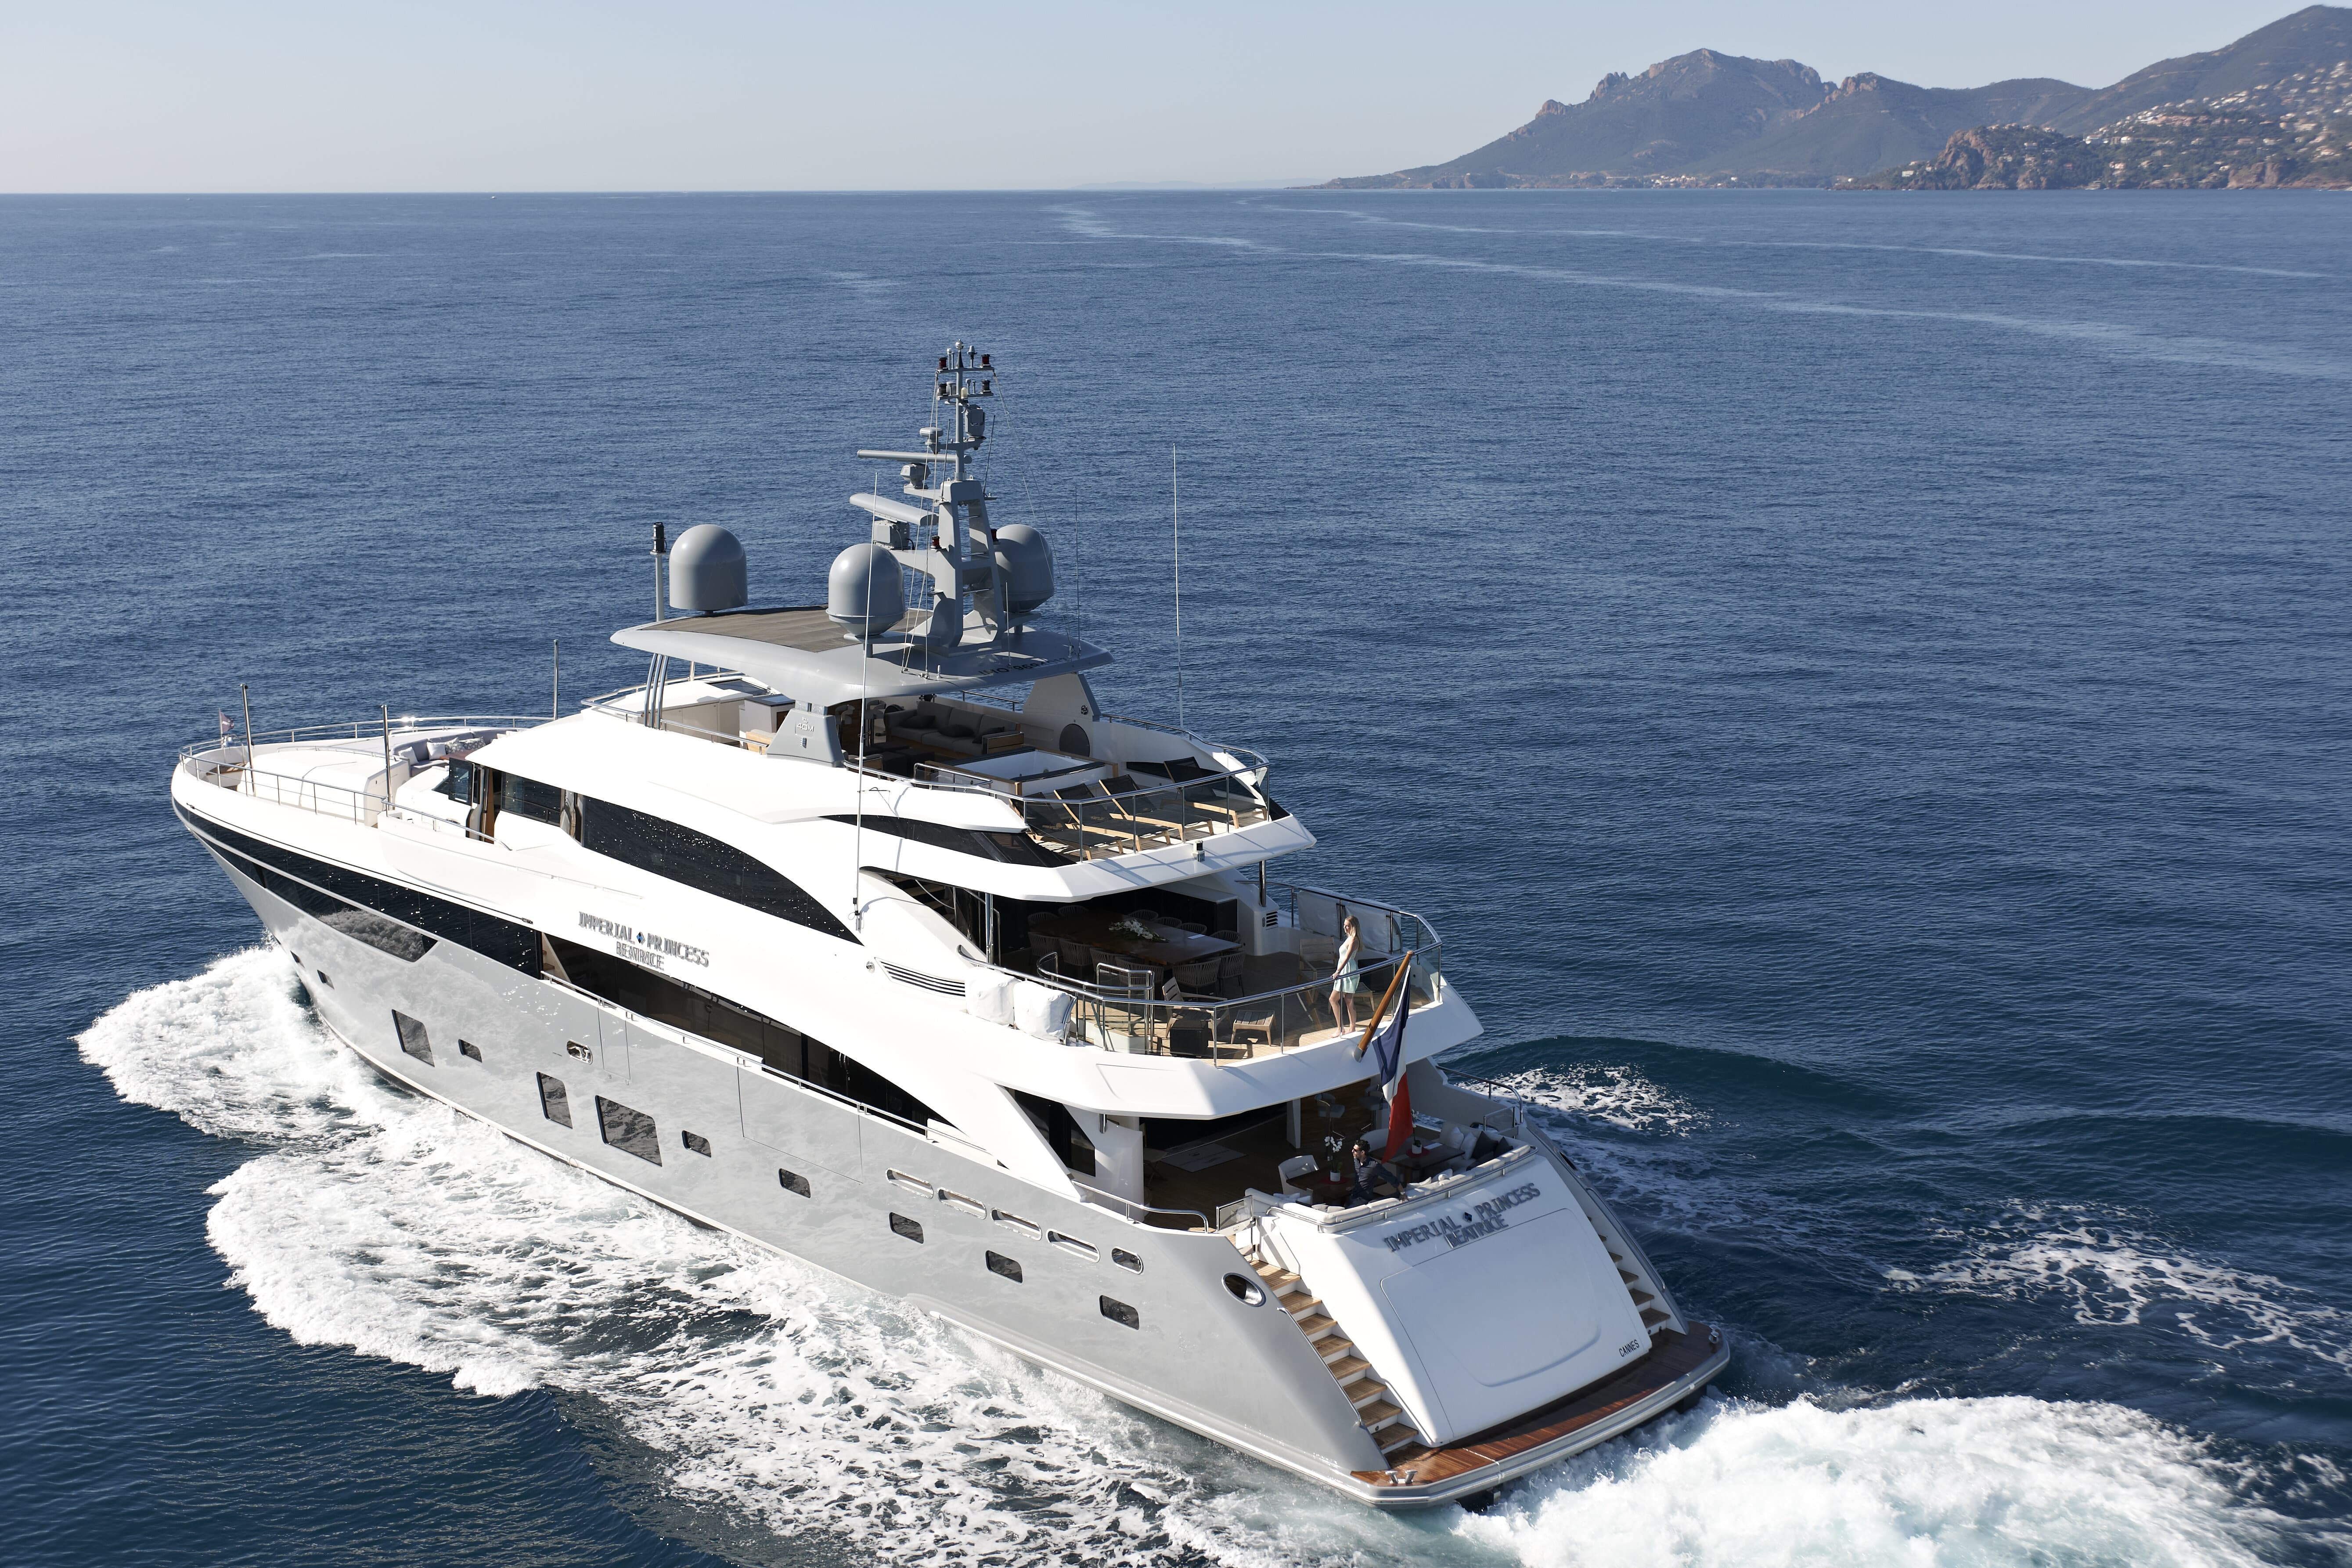 Princess 40m Beatrice Yacht For Charter14